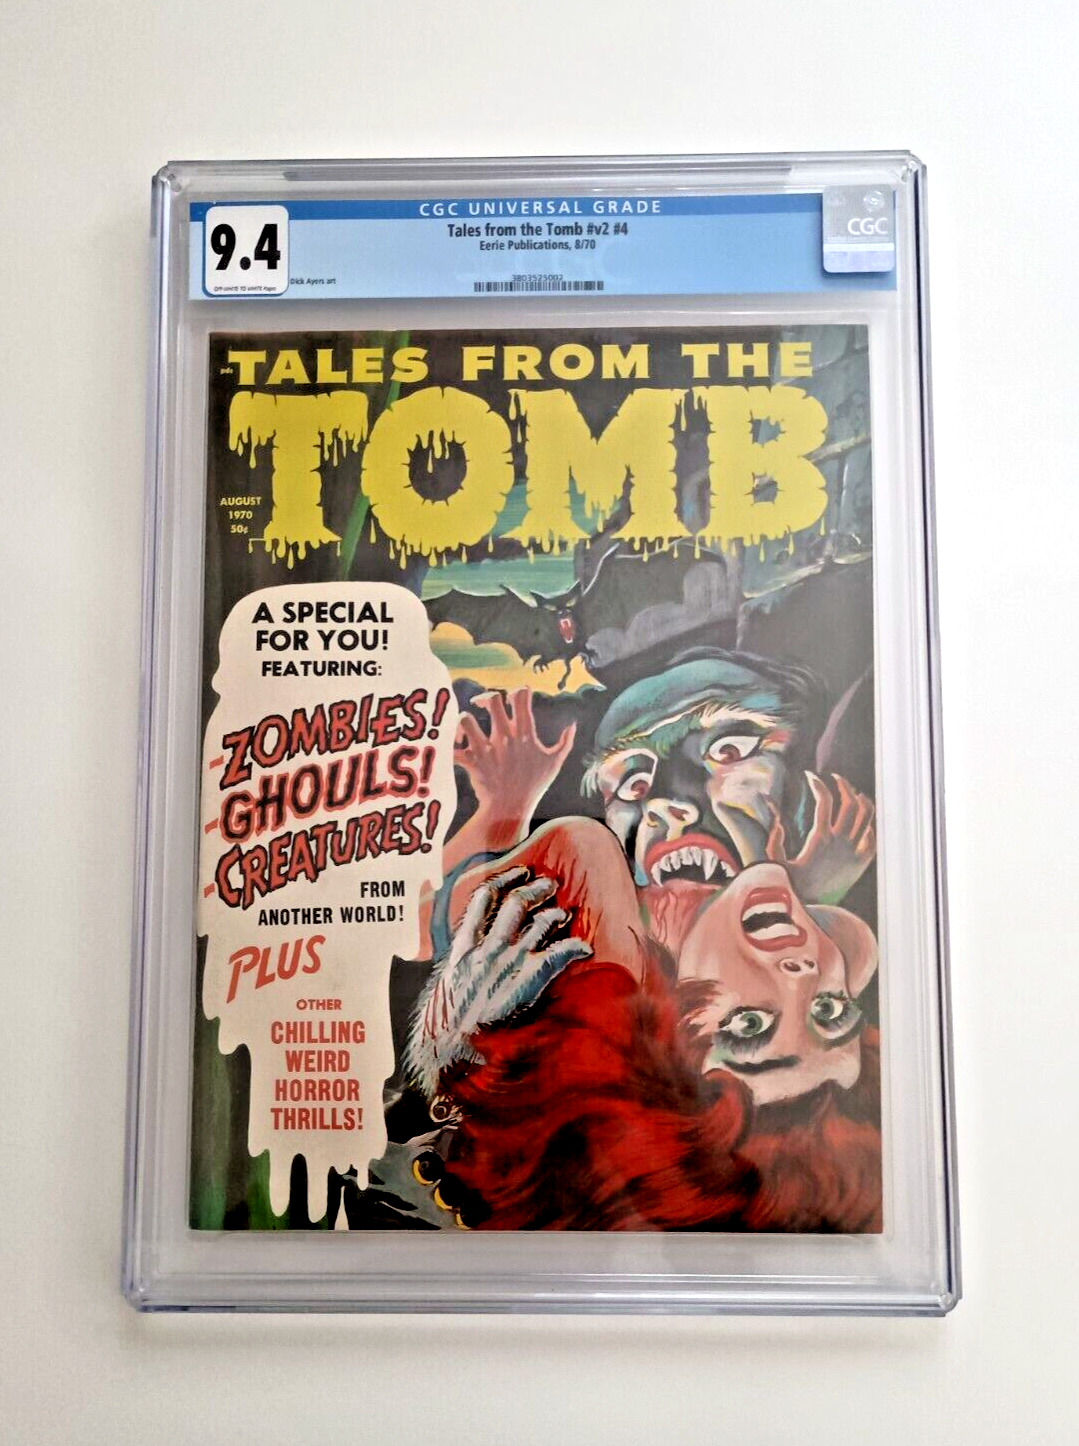 1970 TALES FROM THE TOMB #4 🦇 EERIE PUB. CGC 9.4 🦇 VAMPIRE NECK BITING COVER 